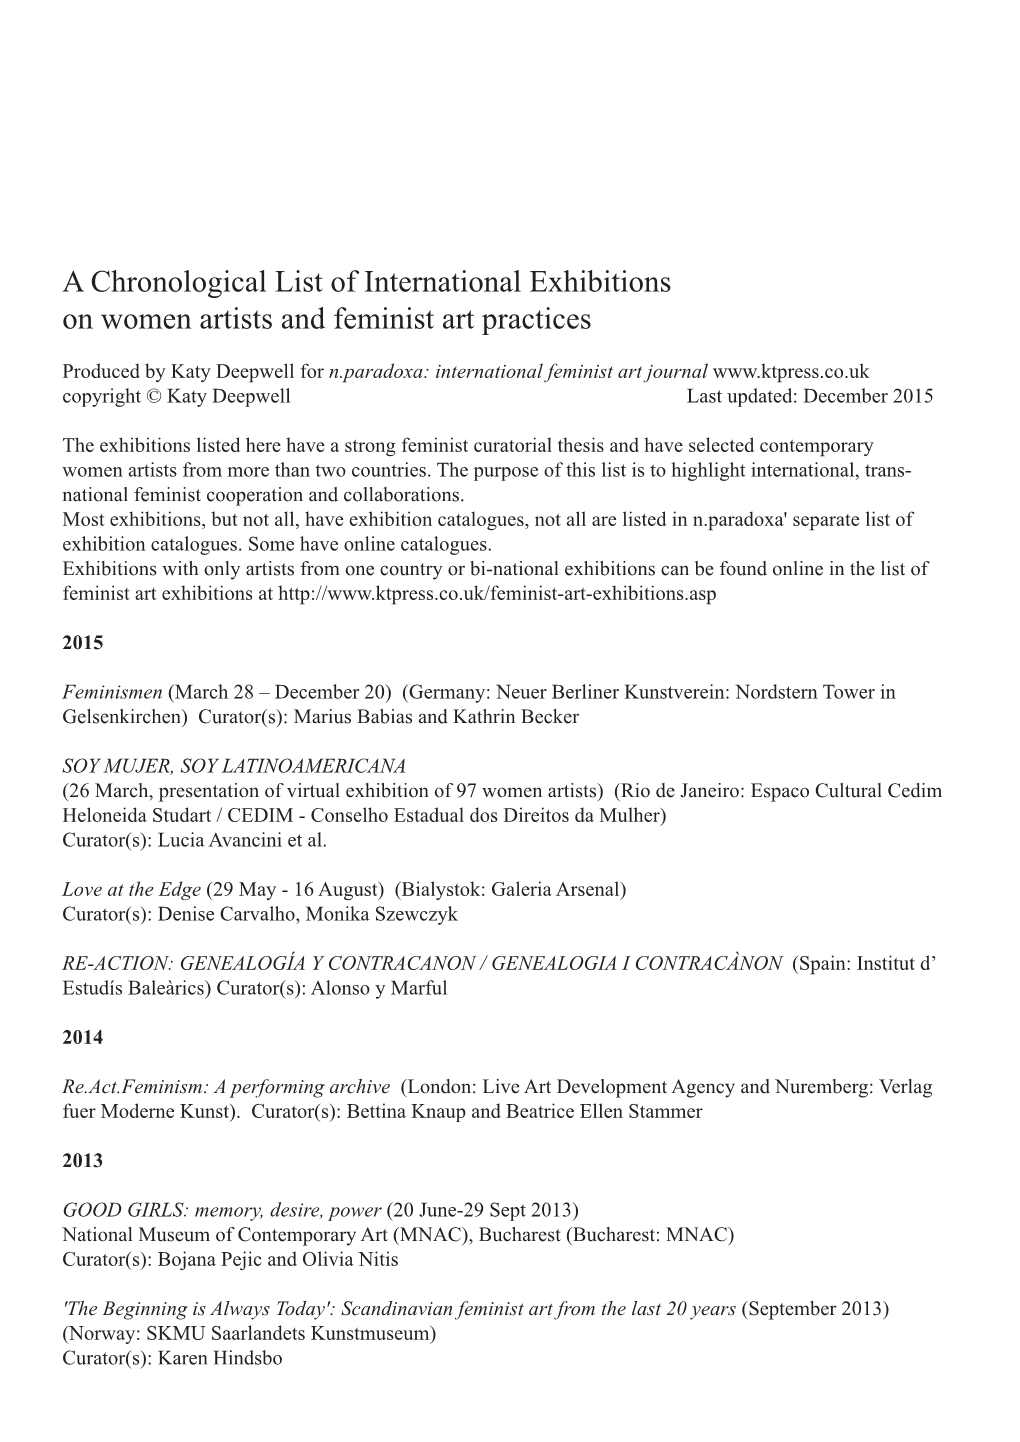 A Chronological List of International Exhibitions on Women Artists and Feminist Art Practices